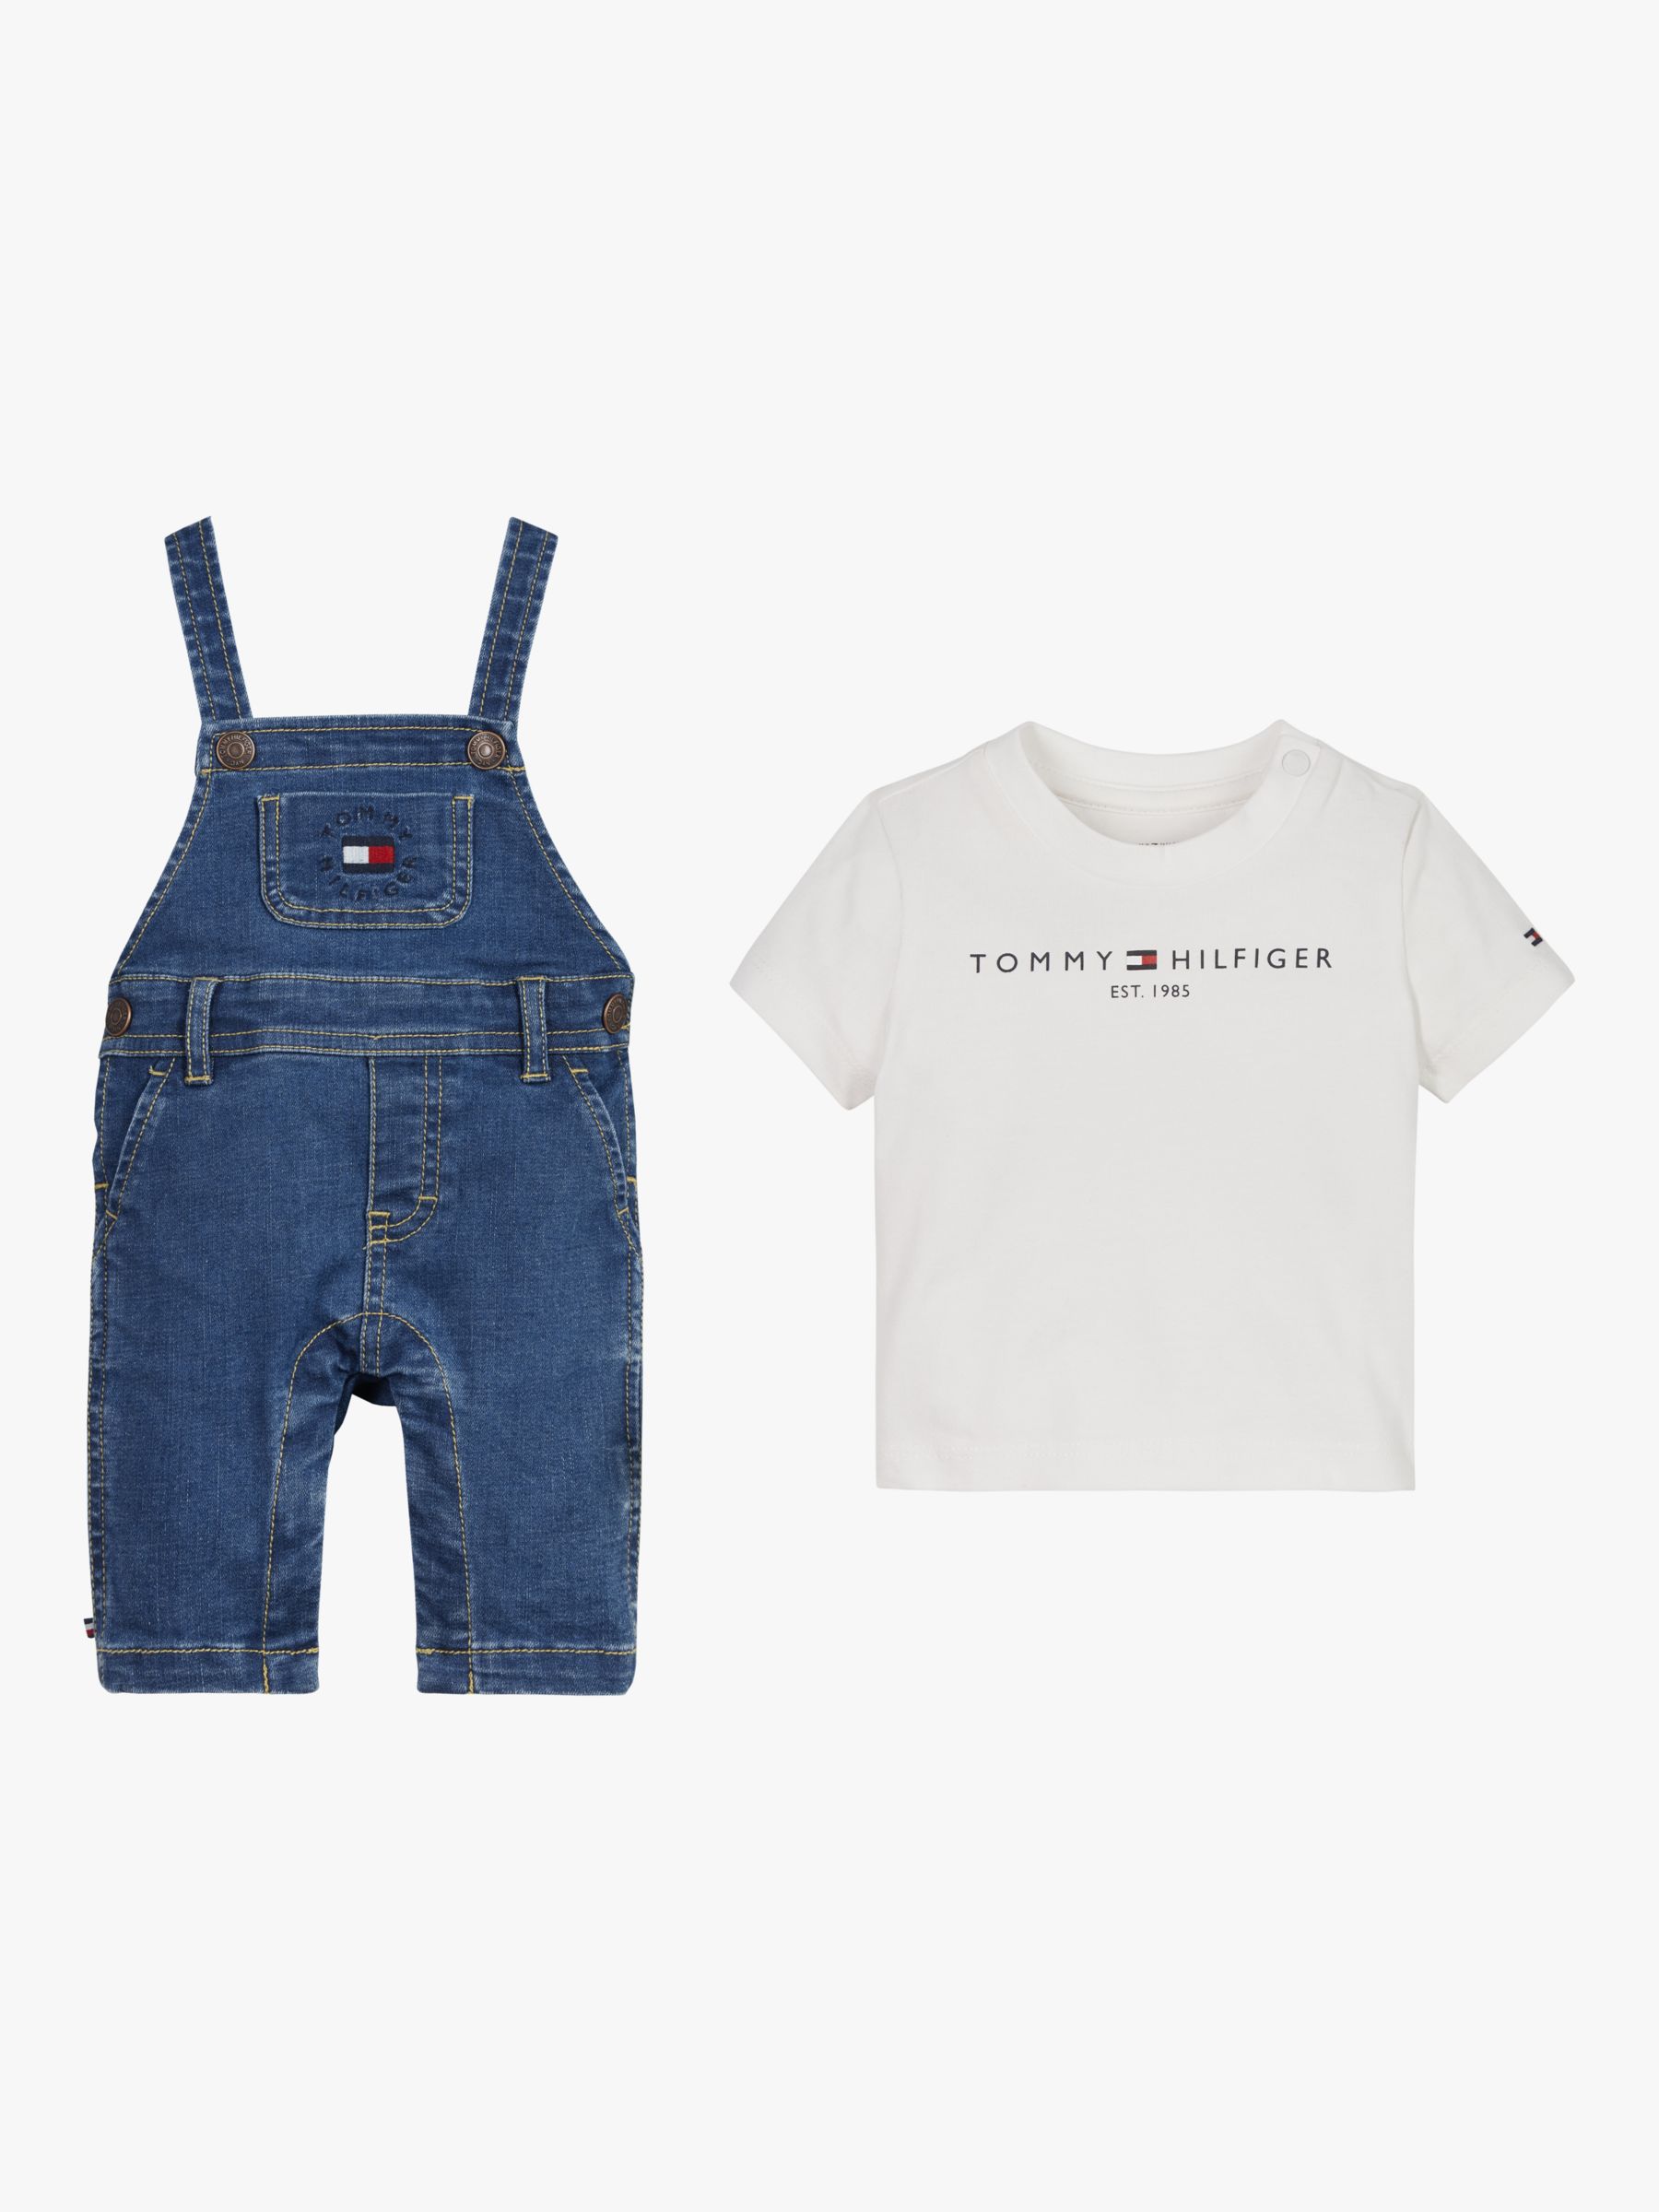 Tommy Hilfiger Baby T-Shirt & Dungaree Set, Multi, 24 months